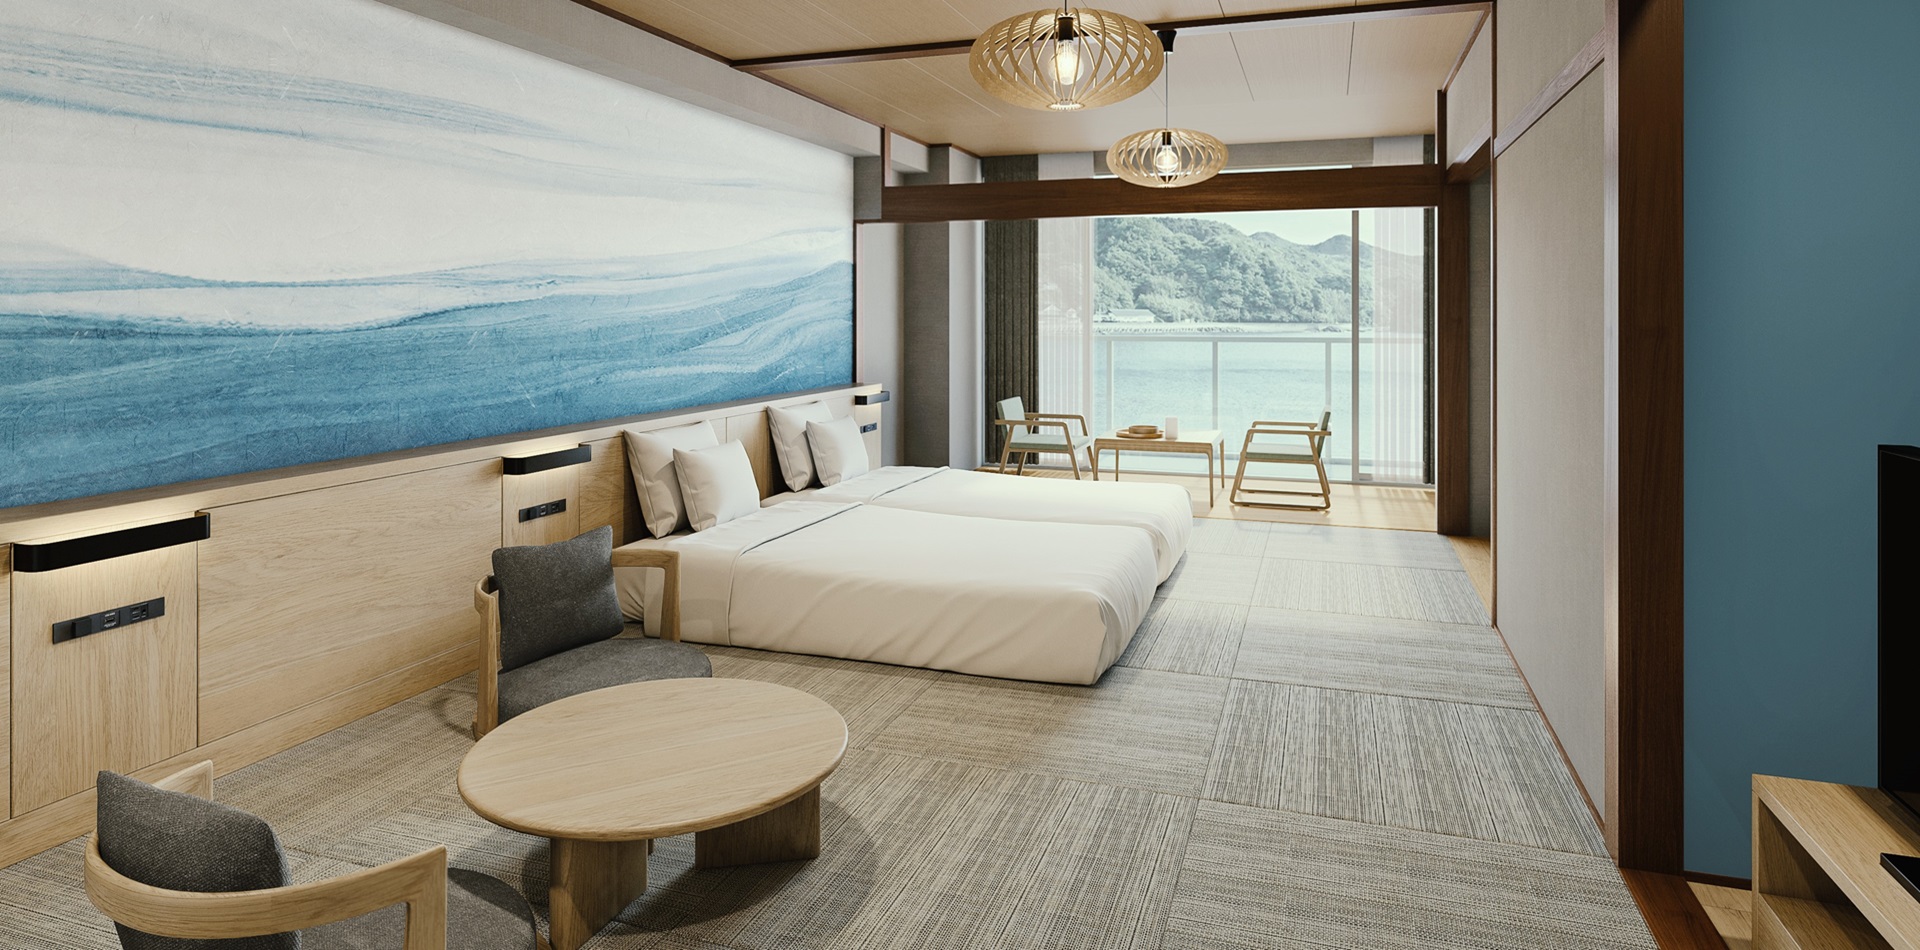 A Japanese-Western style room with an interior inspired by the sea of Katsuura.